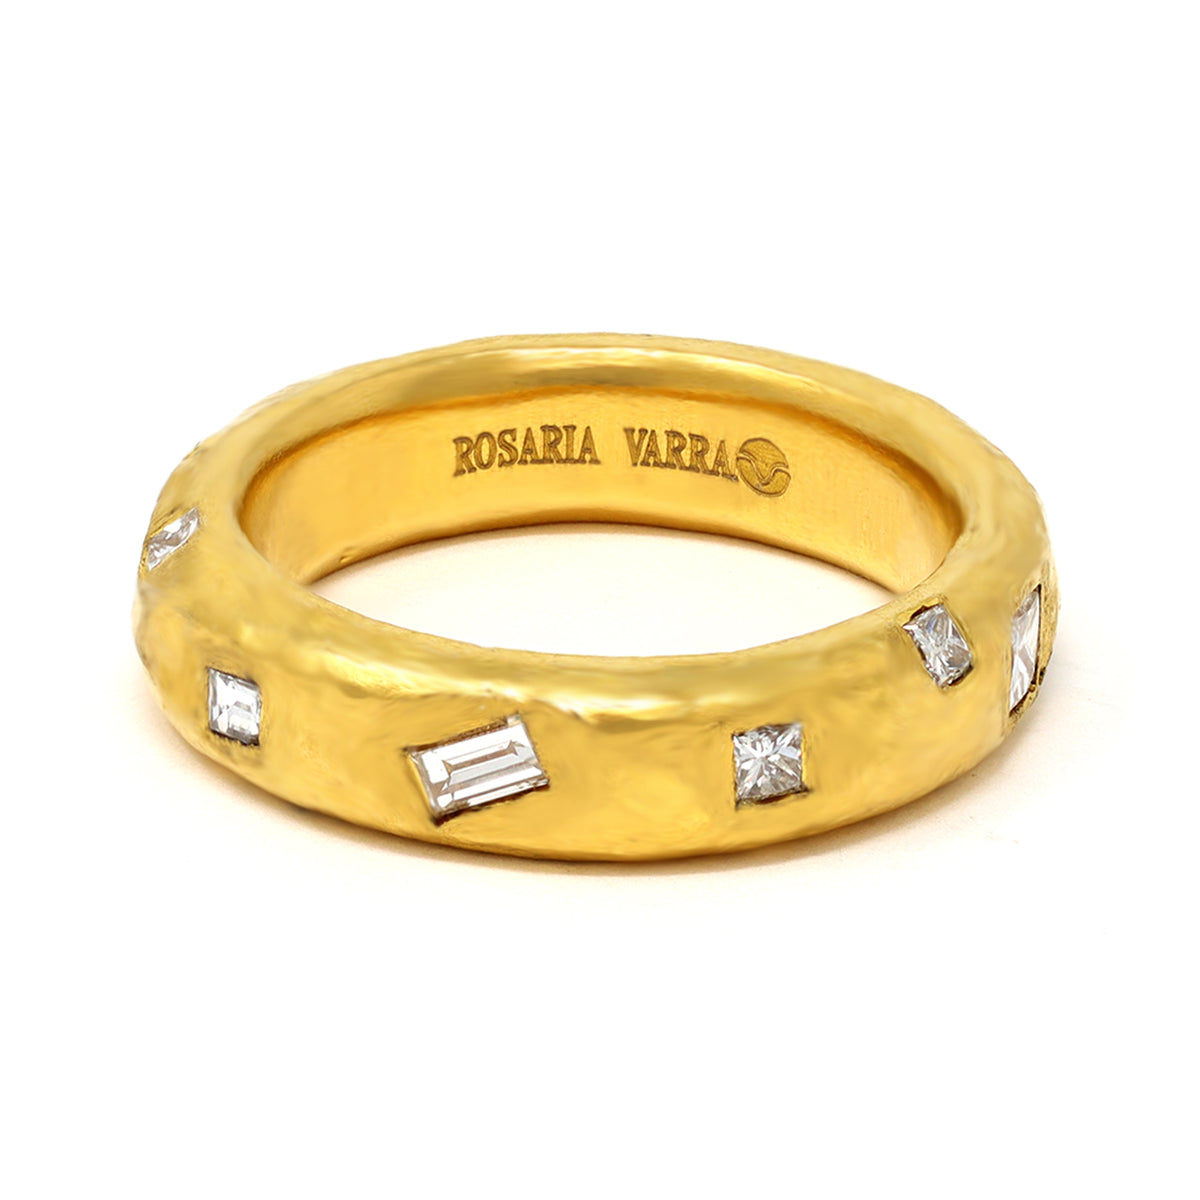 Rosaria Varra Diamond Band Ring in 24K Gold makers mark view